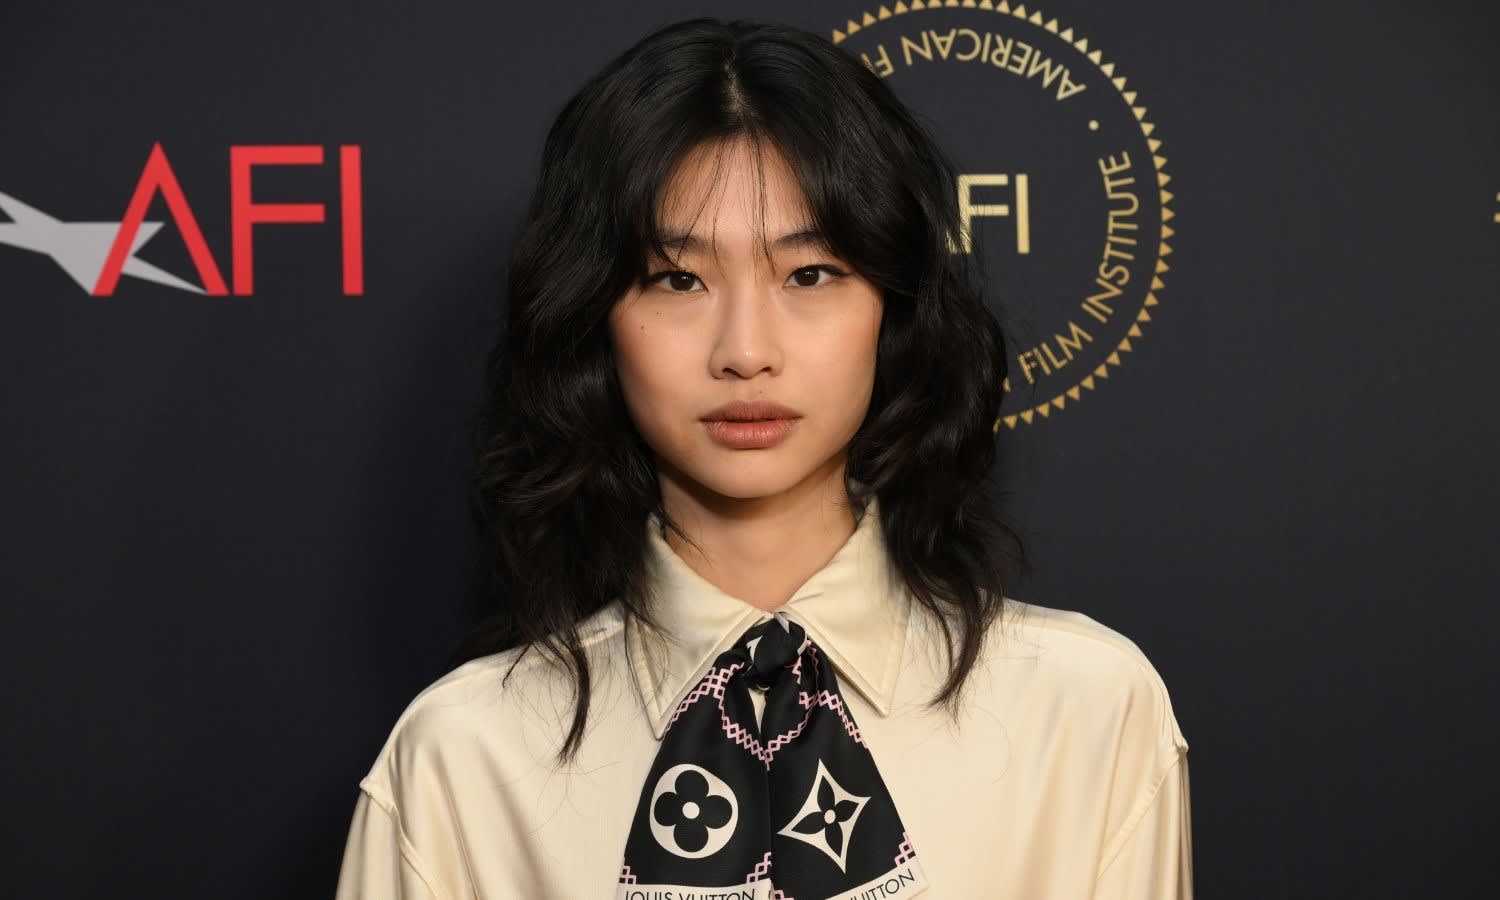 Jung Ho-yeon joins Cate Blanchett in Apple TV+ thriller series